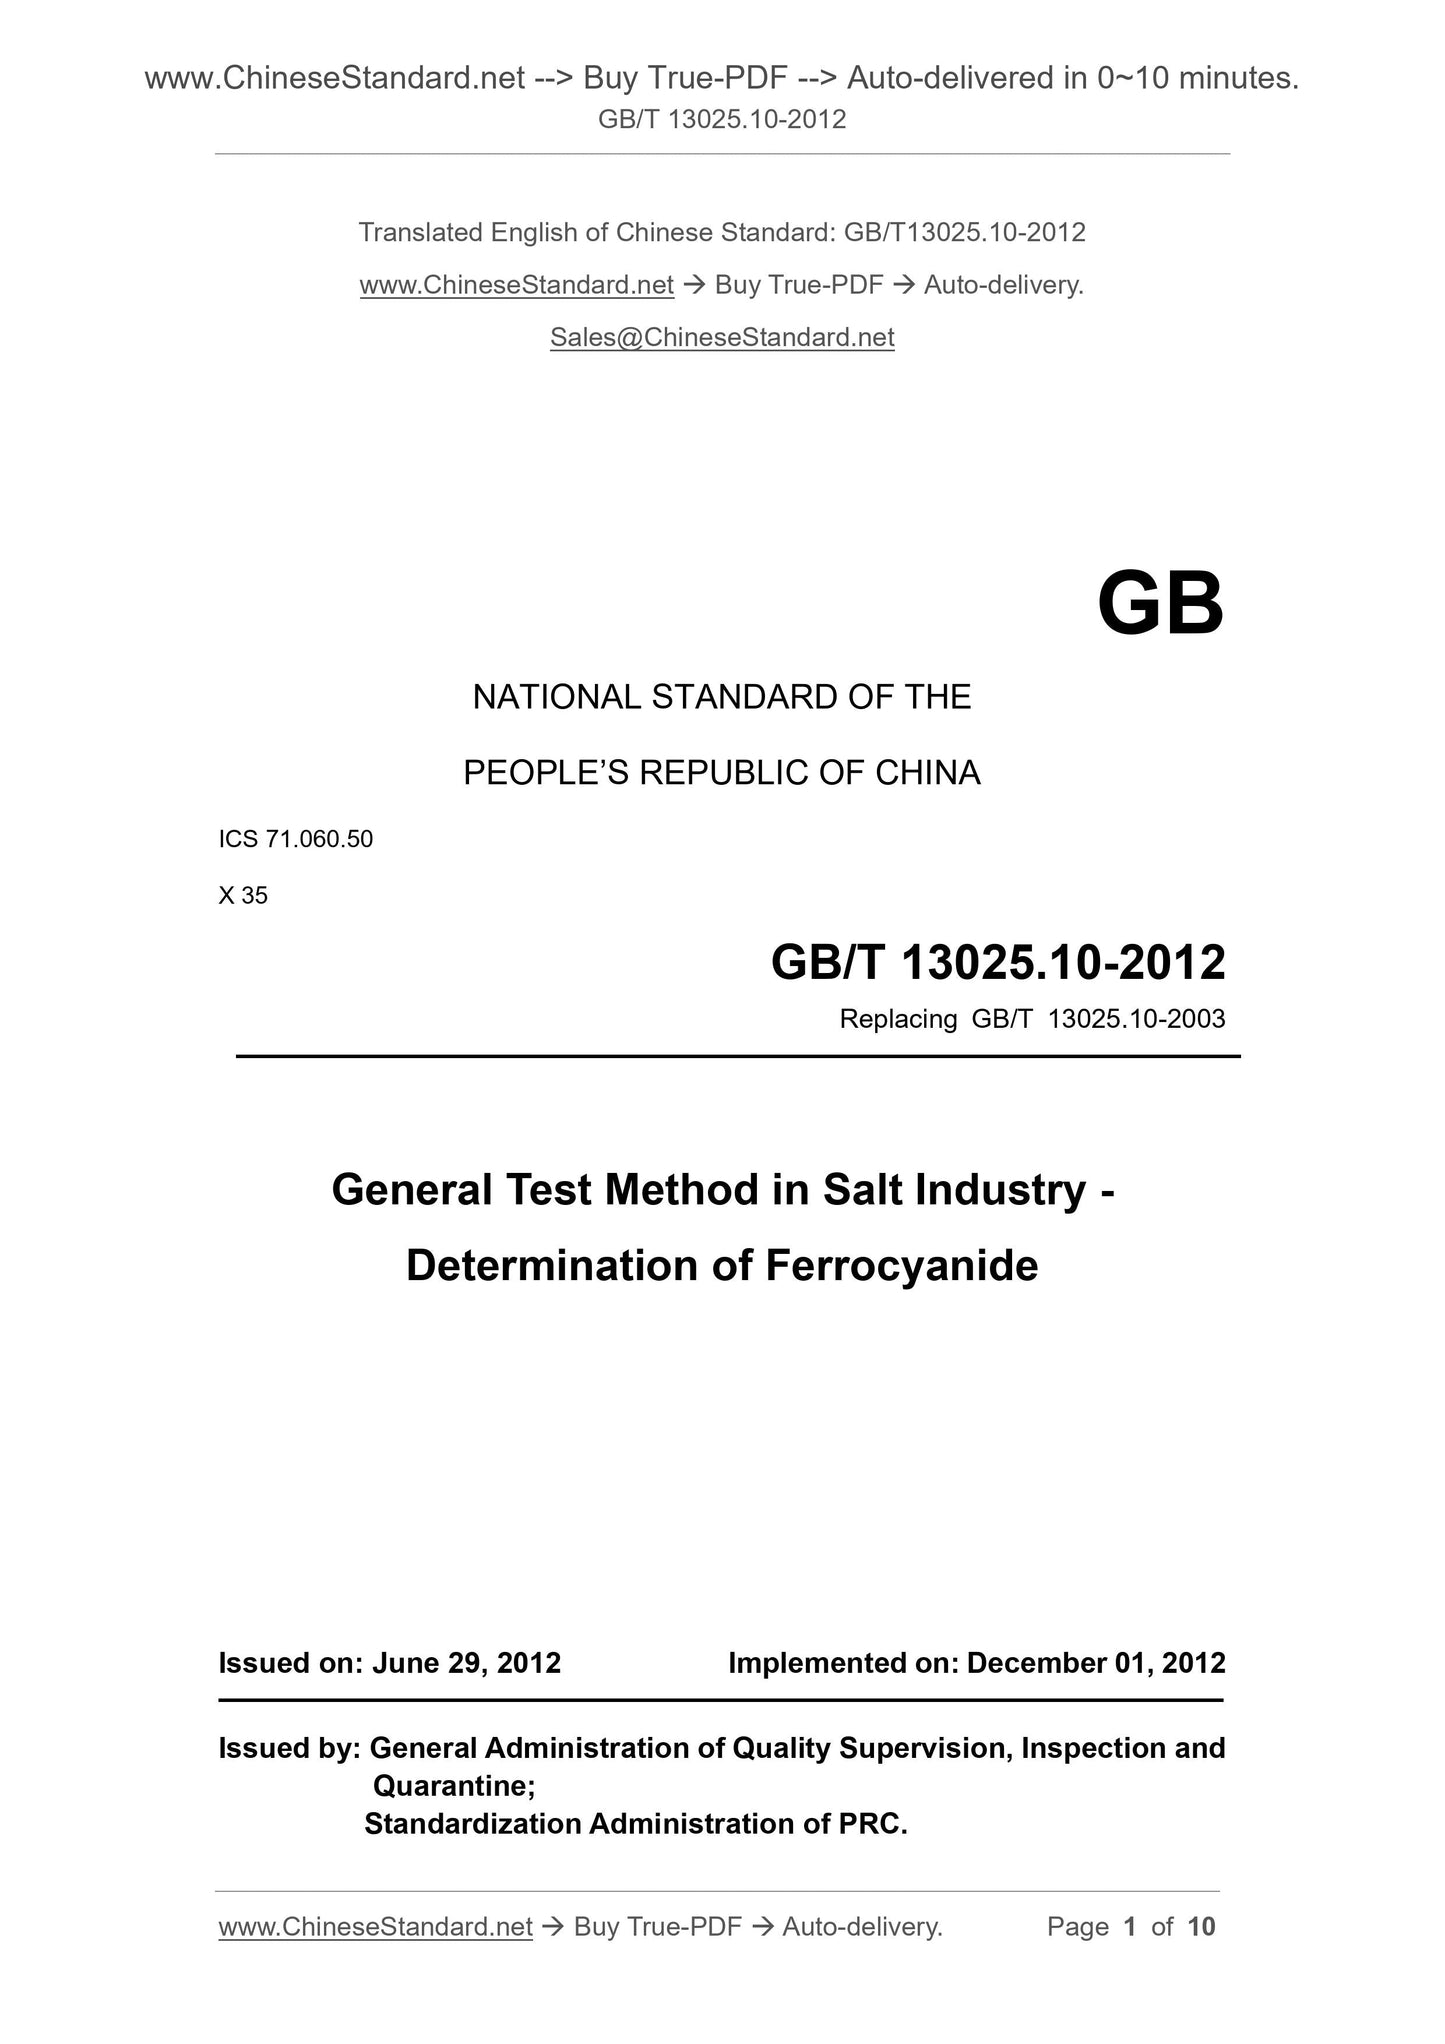 GB/T 13025.10-2012 Page 1